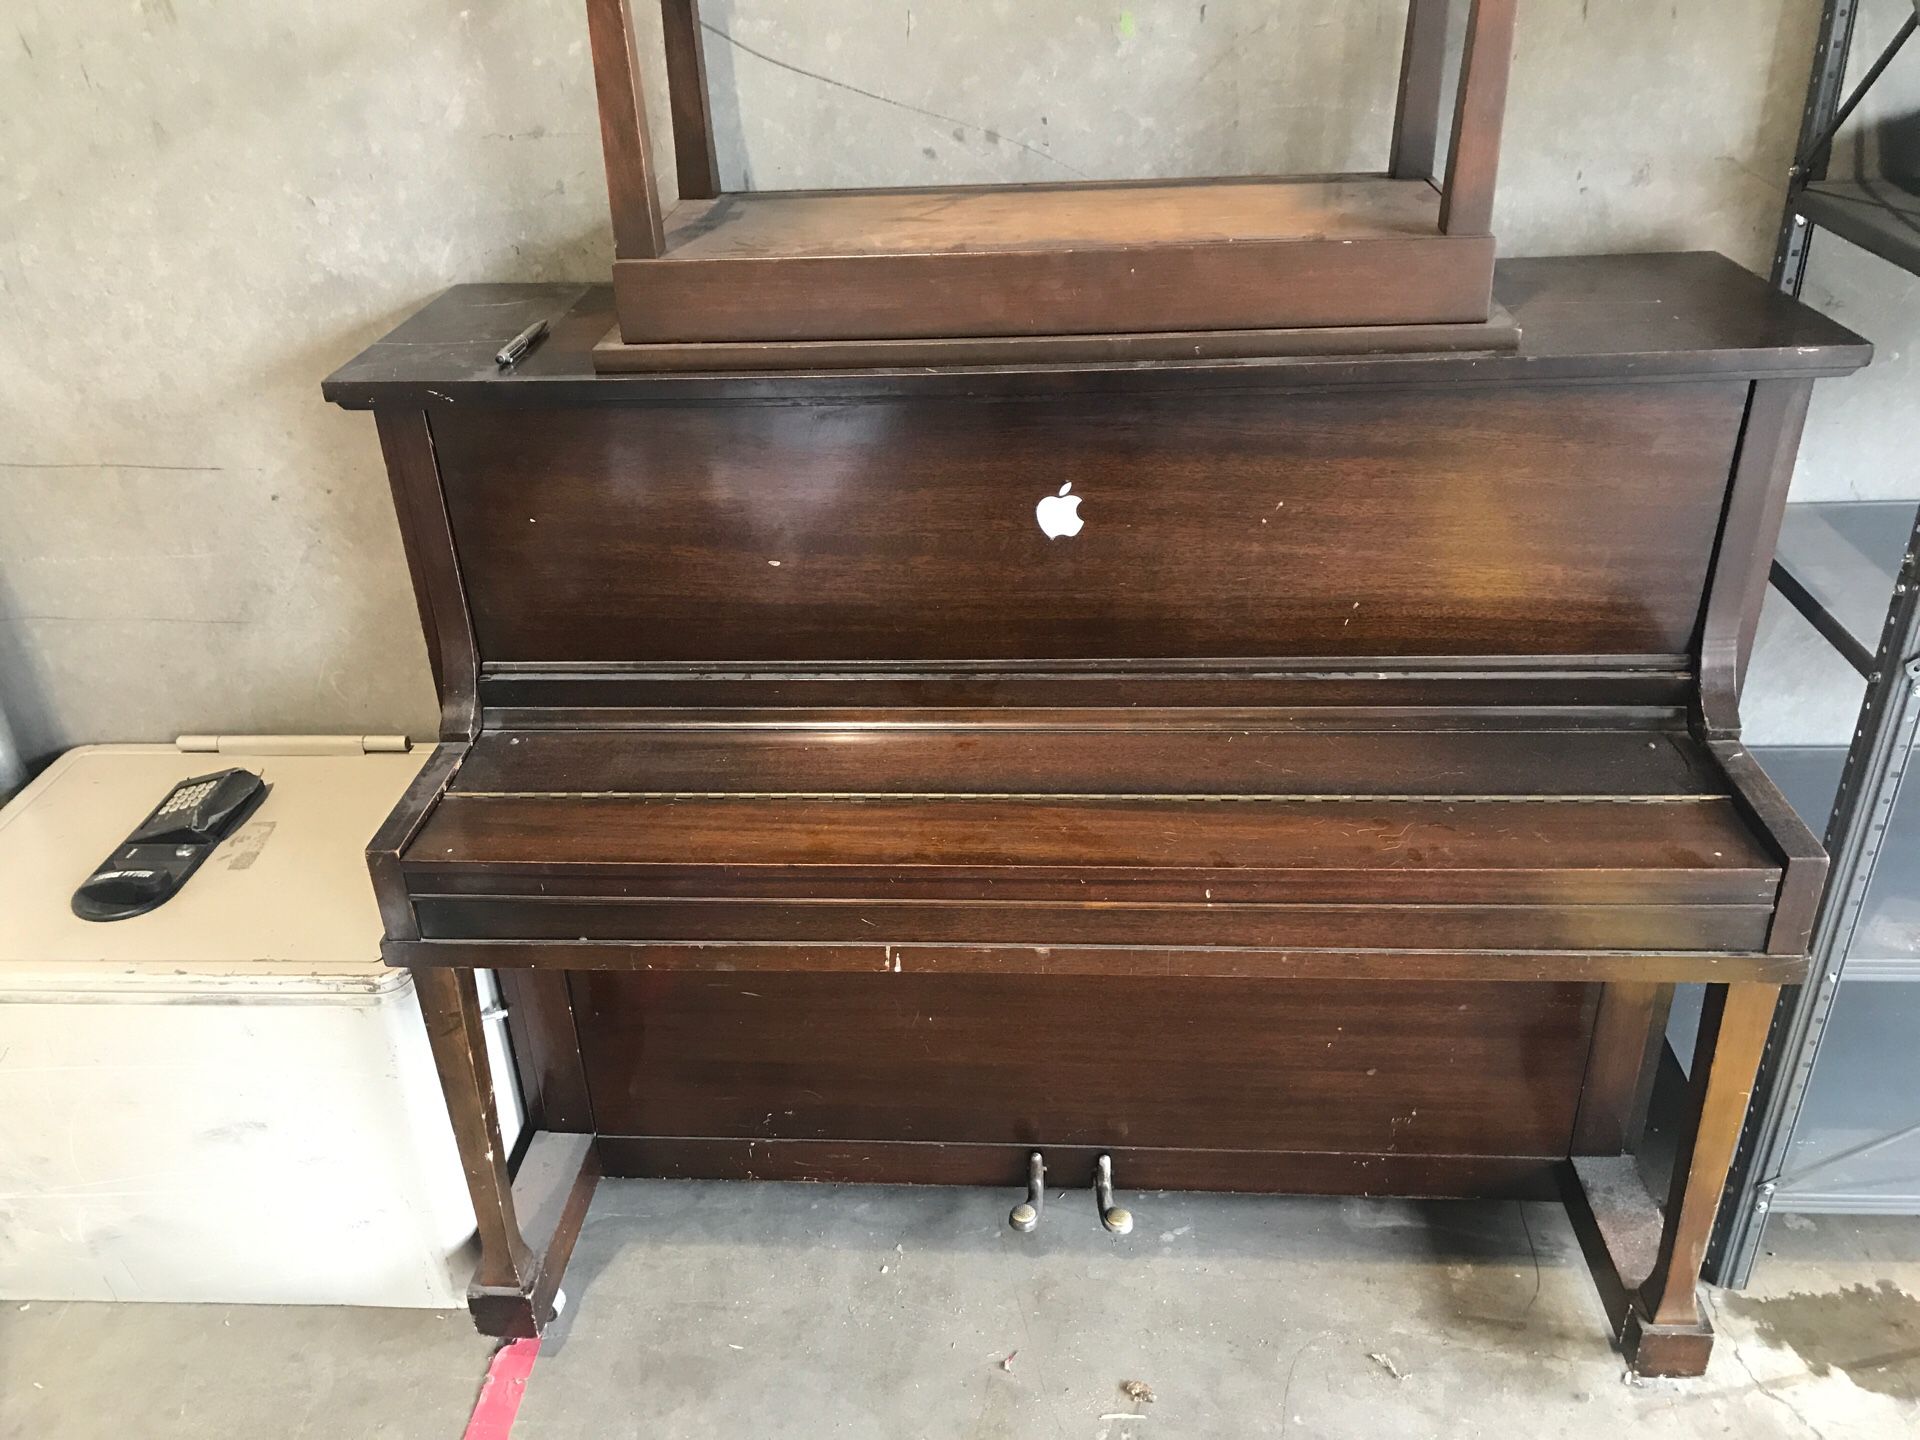 Settergren Piano and Bench